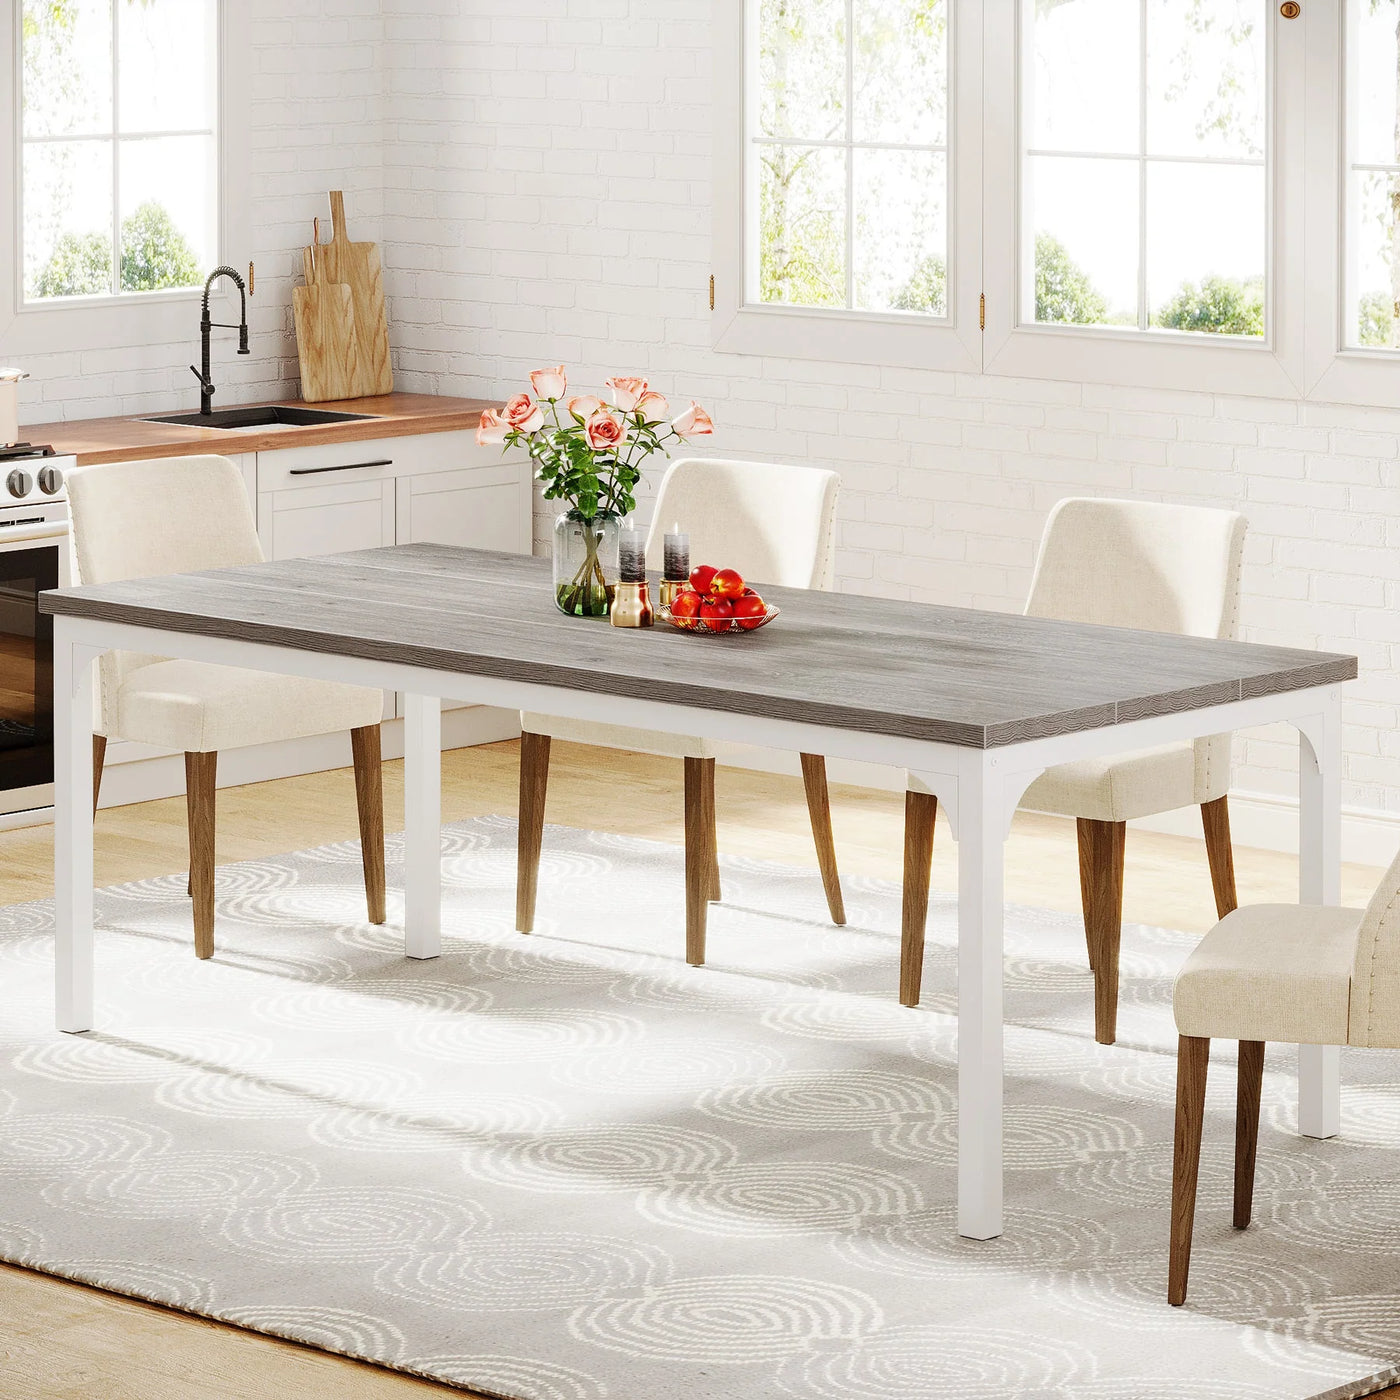 Amour Wood Dining Table | 70.9" Farmhouse Rectangular Rustic Kitchen Dinner Table for 6-8